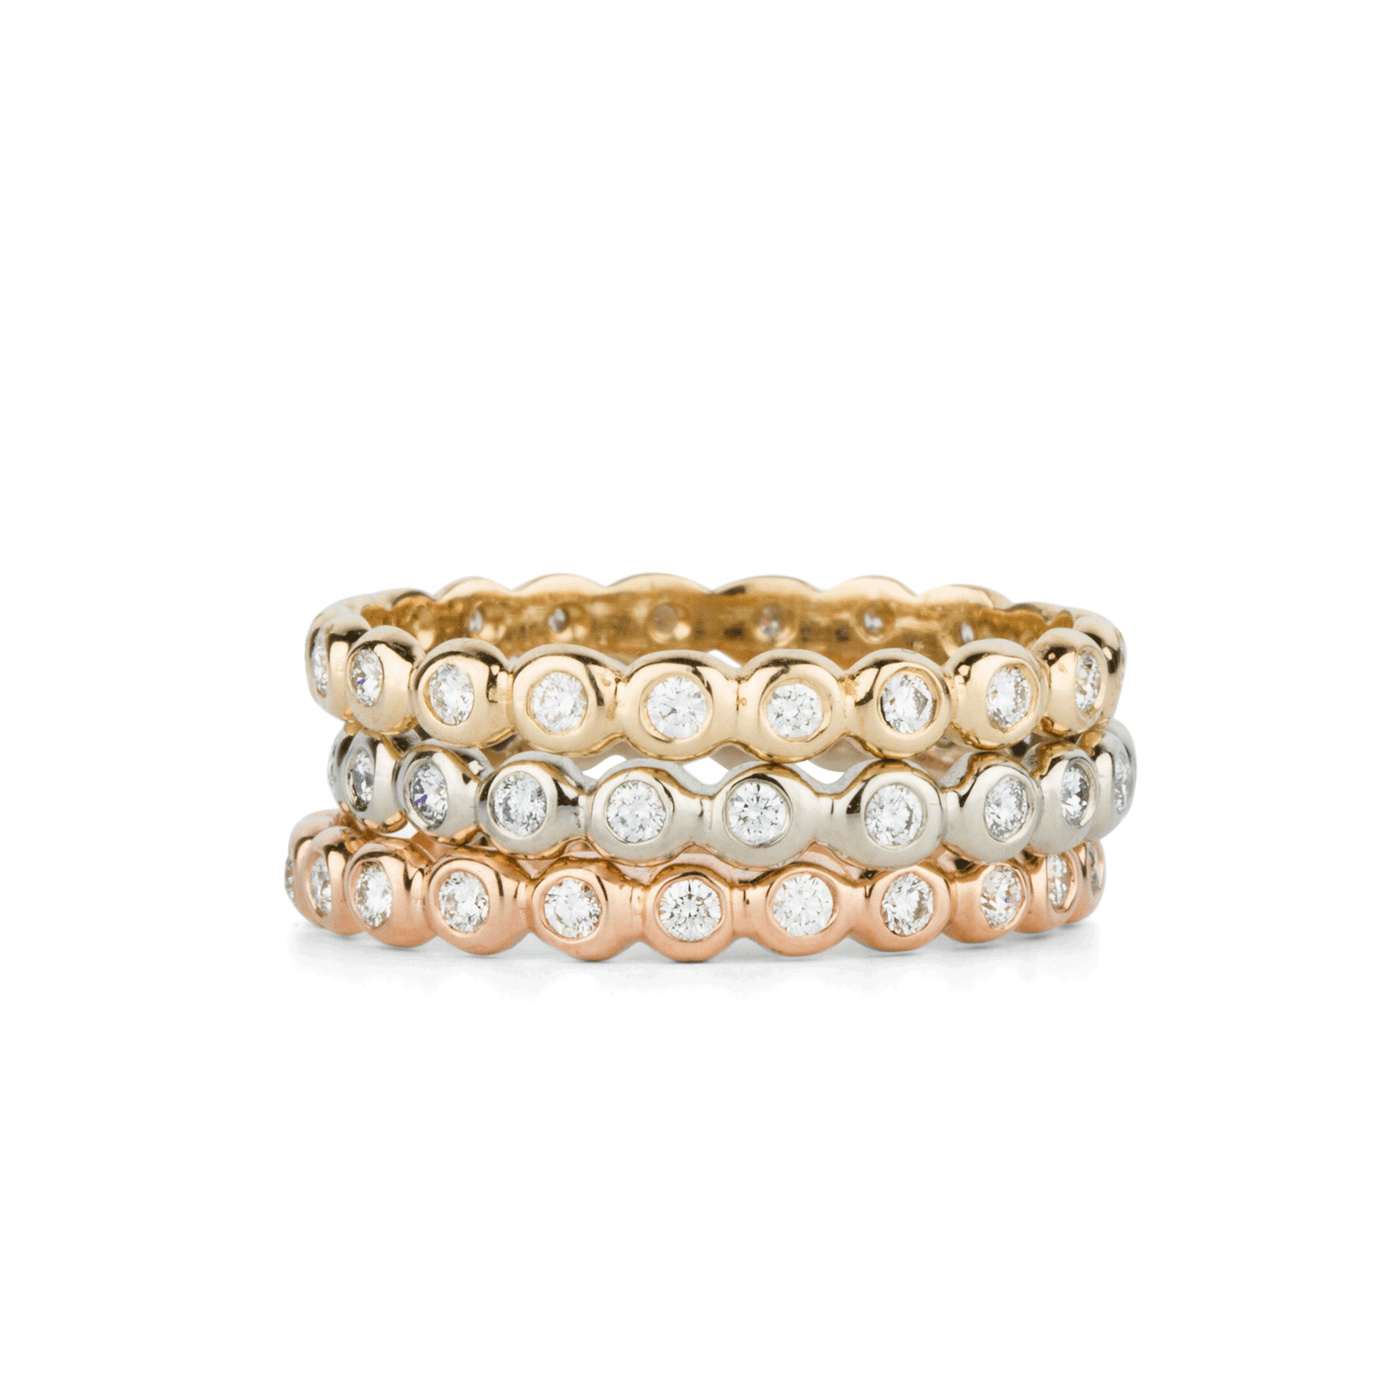 White Diamond Droplet Bands in Yellow, White and Rose Gold | Corey Egan